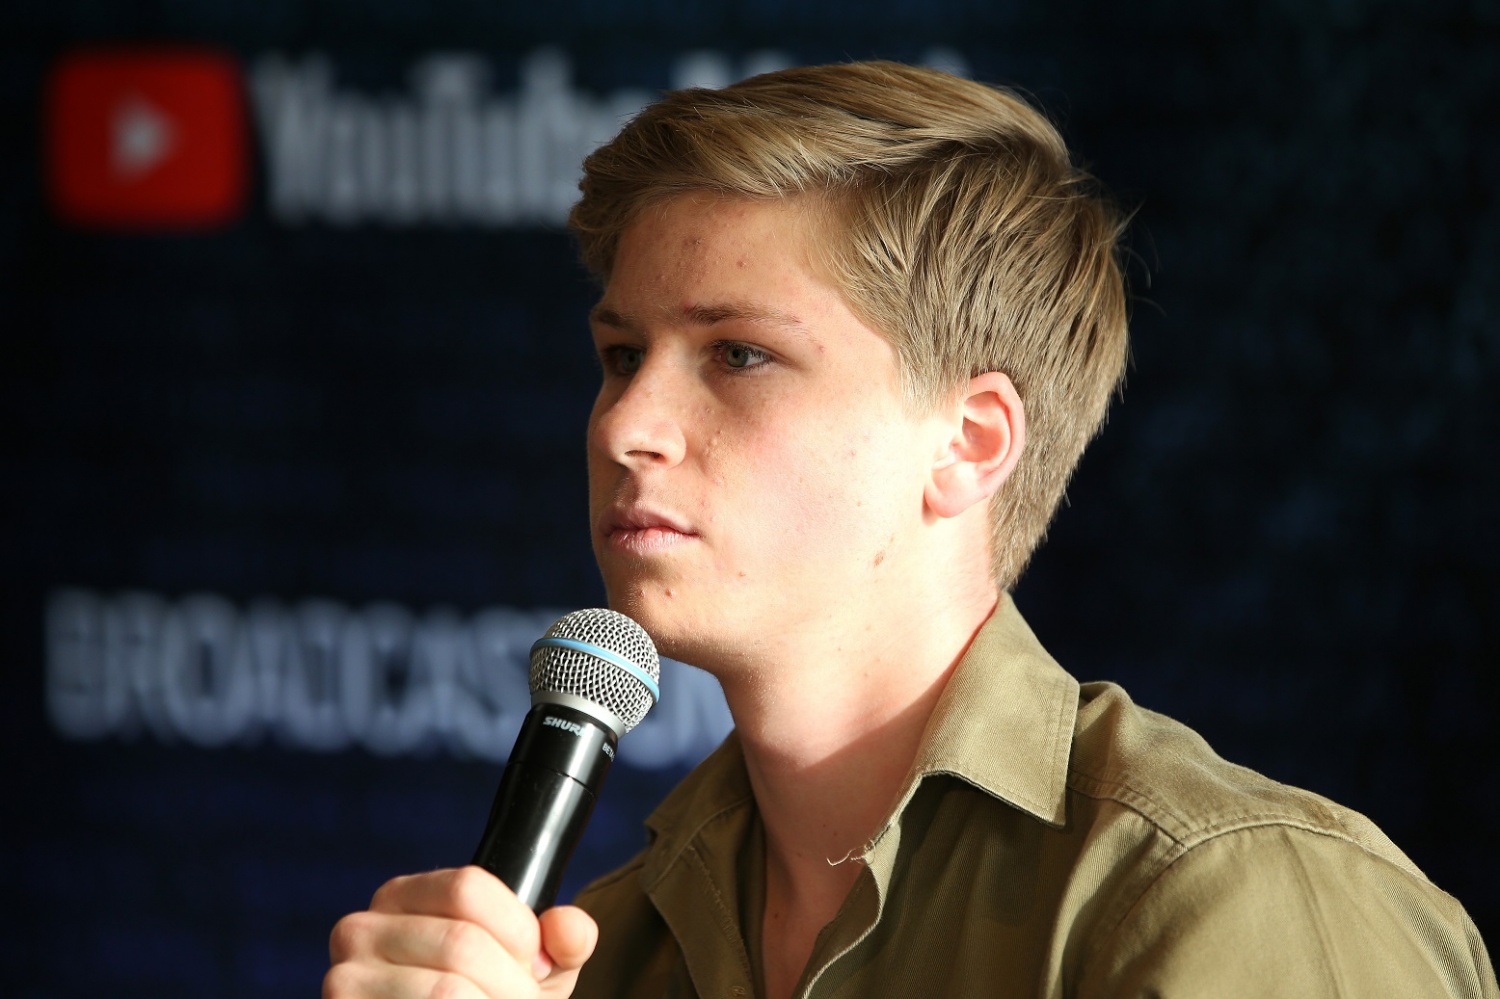 Robert Irwin talks to the media in the awards room during the 33rd Annual ARIA Awards 2019 at The Star on November 27, 2019 in Sydney, Australia. (Photo by Lisa Maree Williams/Getty Images)